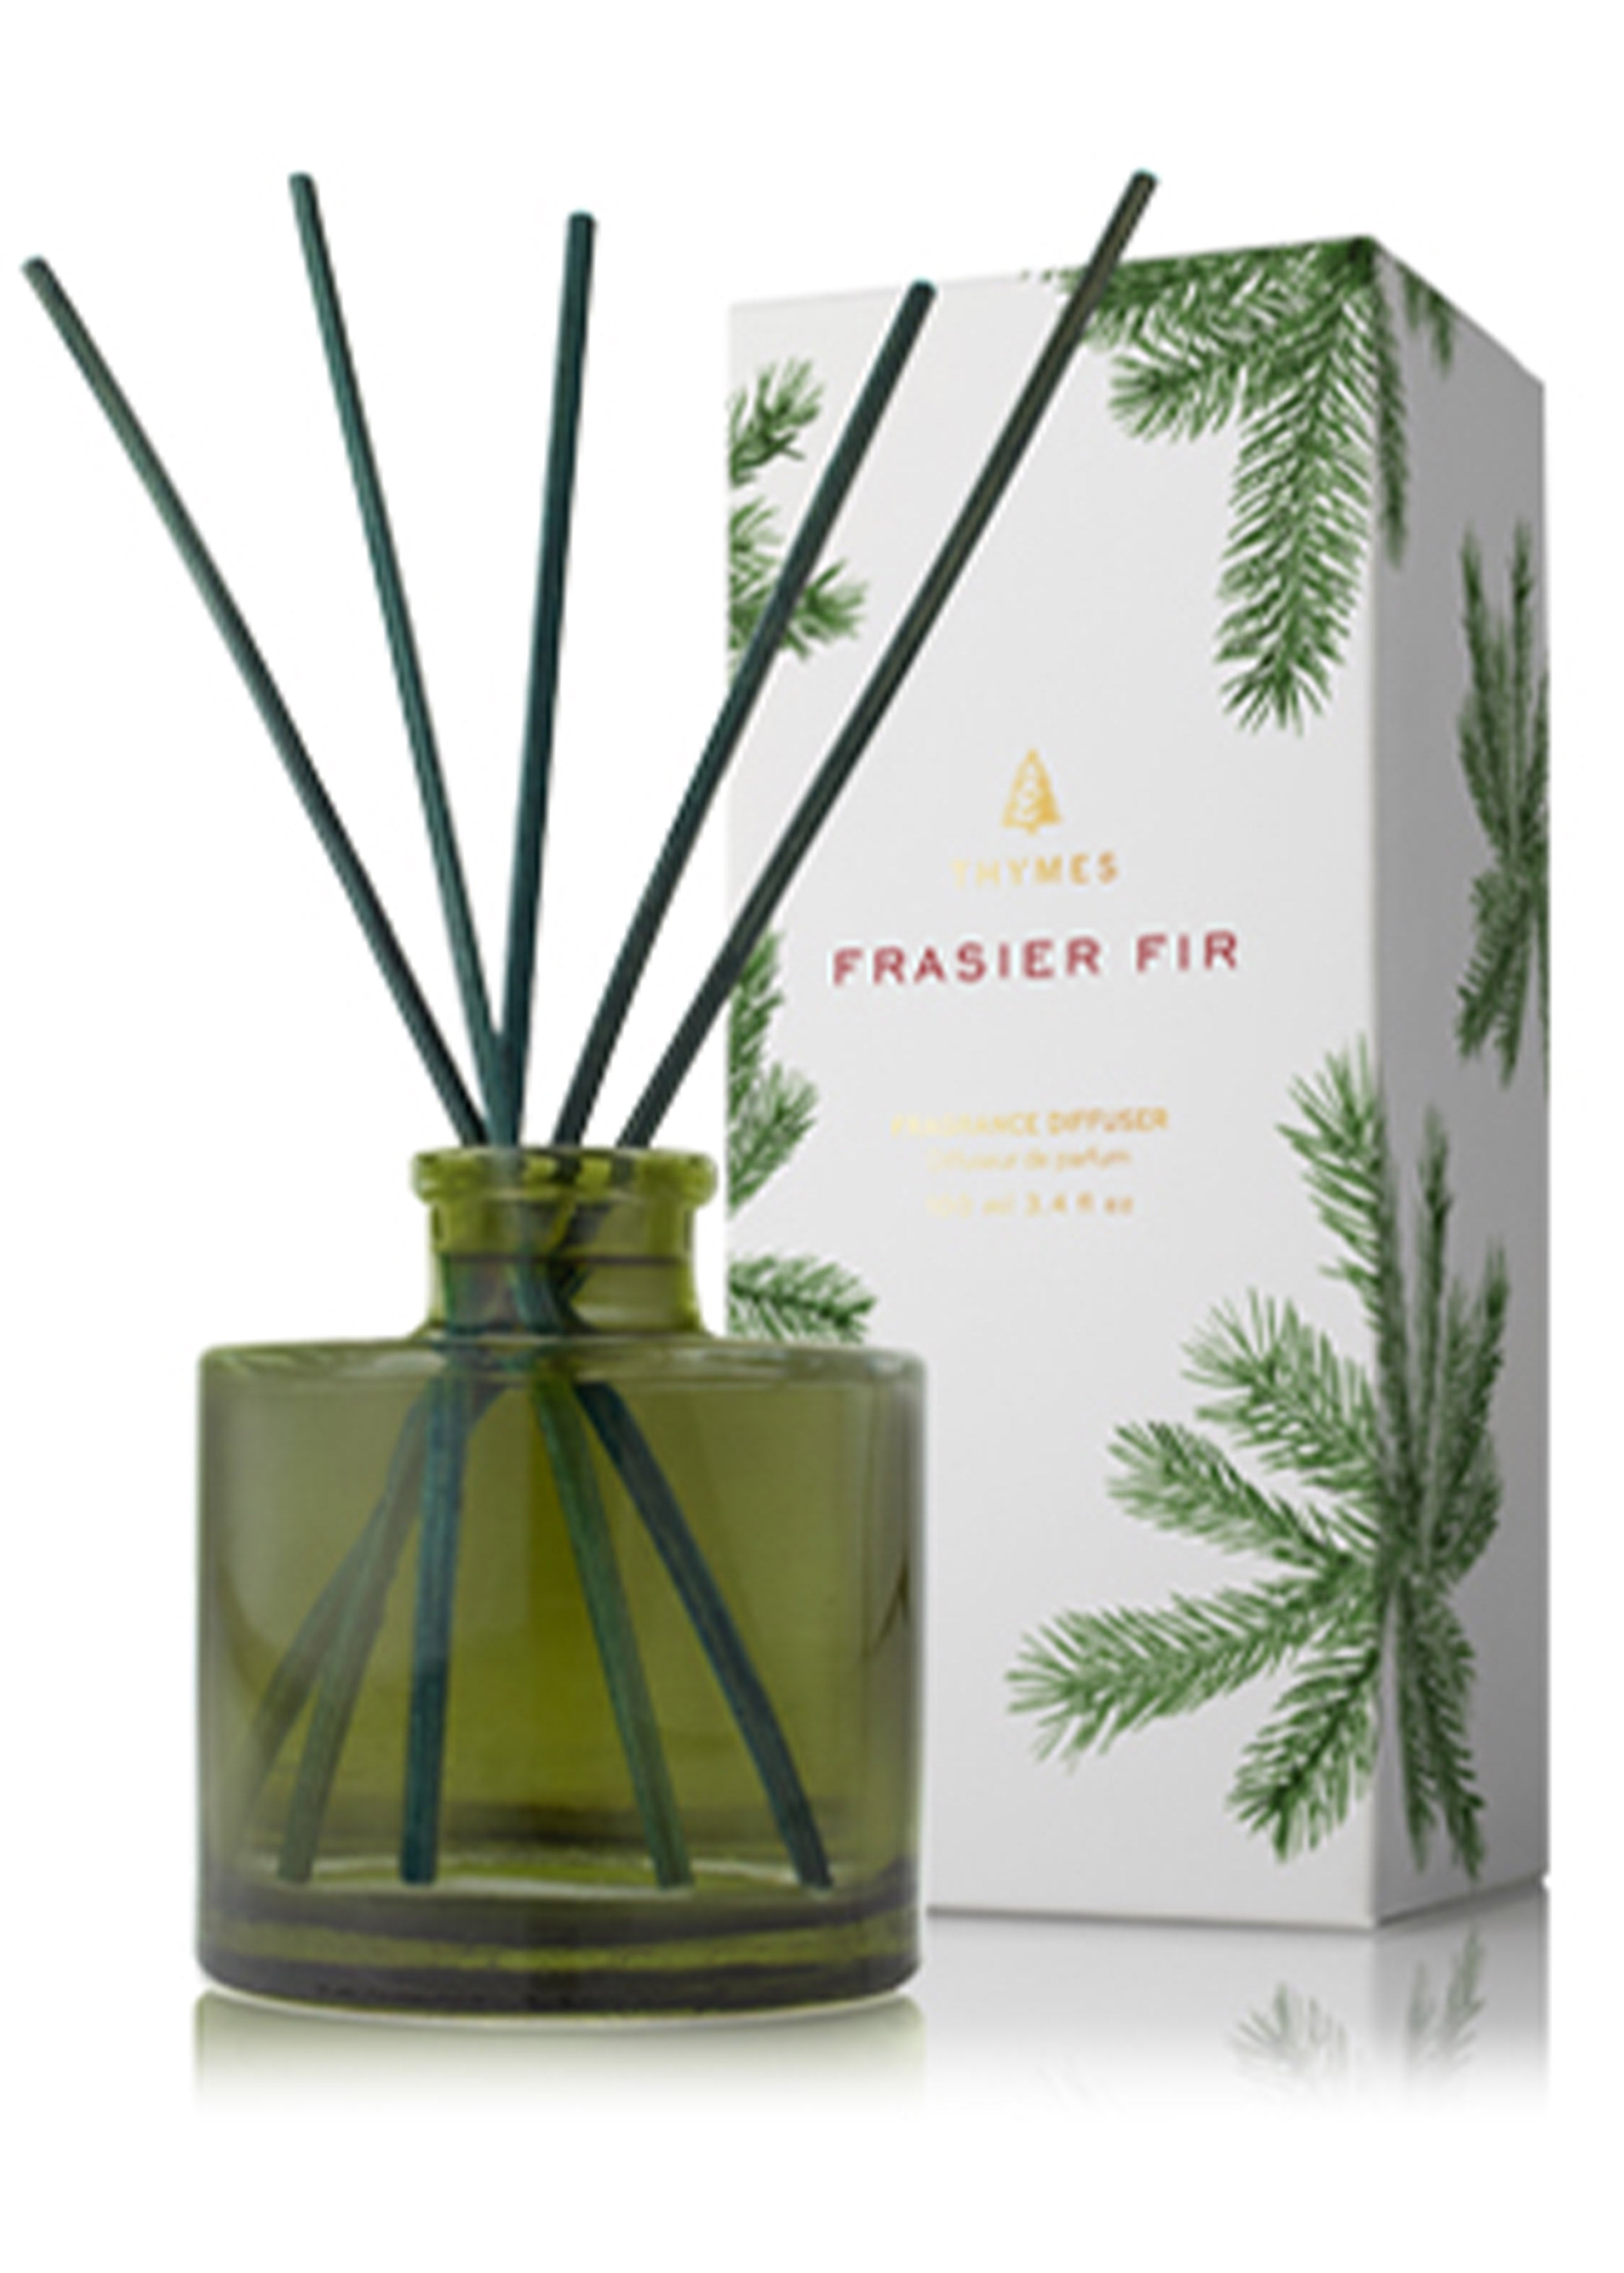 Thymes Pine Needle Design Frasier Fir Poured Candle (6.5oz